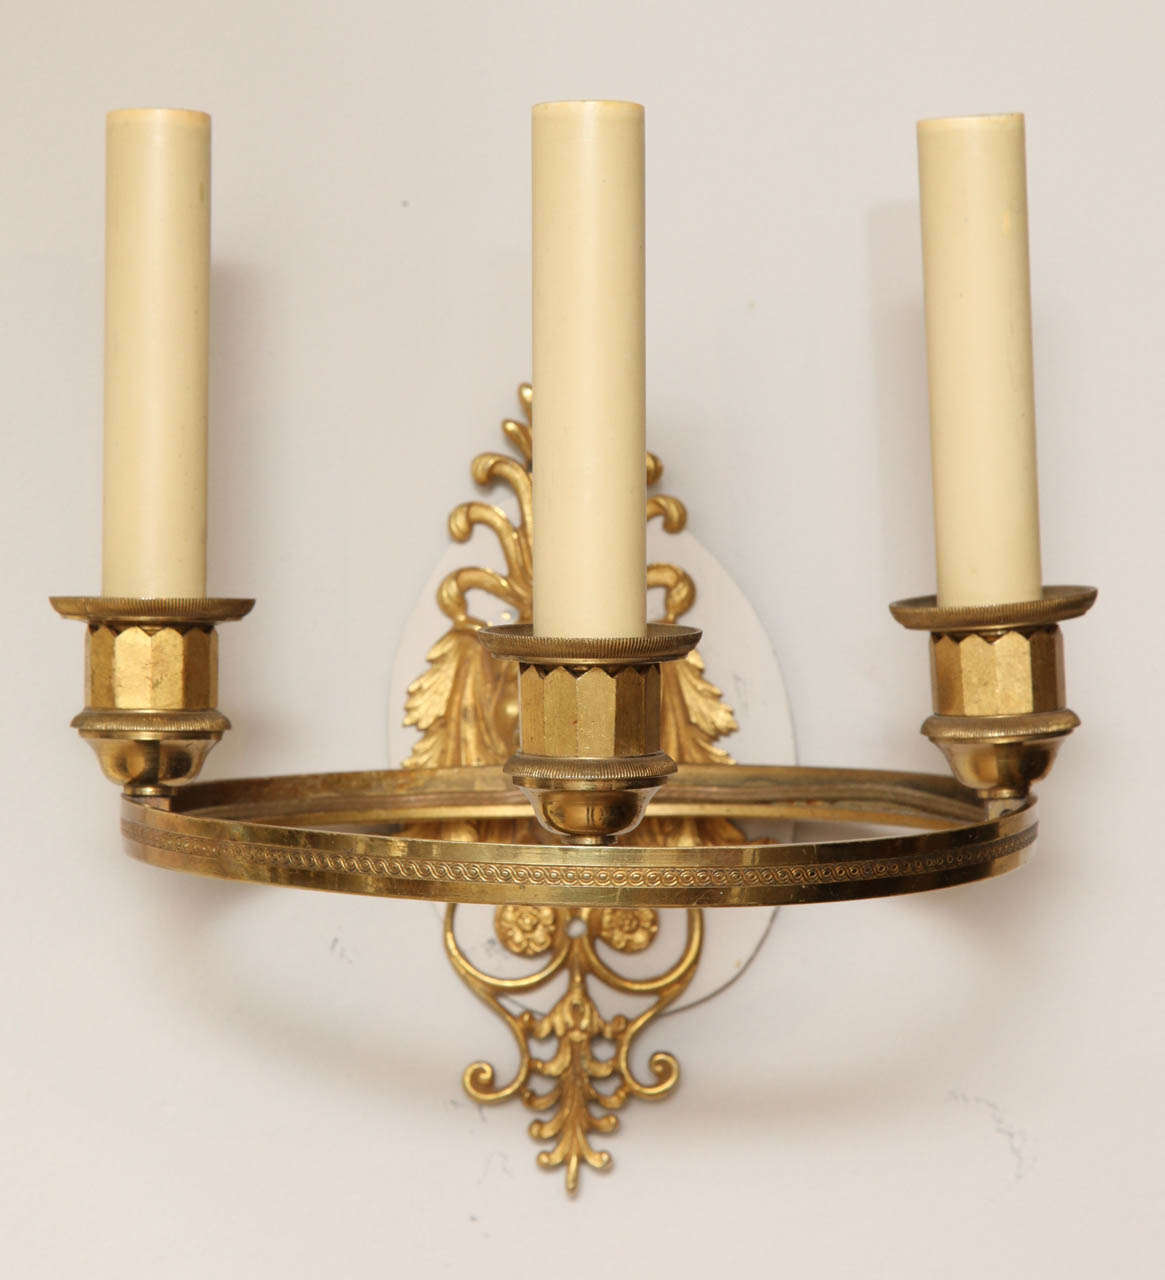 A pair of Charles X period French Empire style ring-form sconces with three lights having a lion's mask backplate.